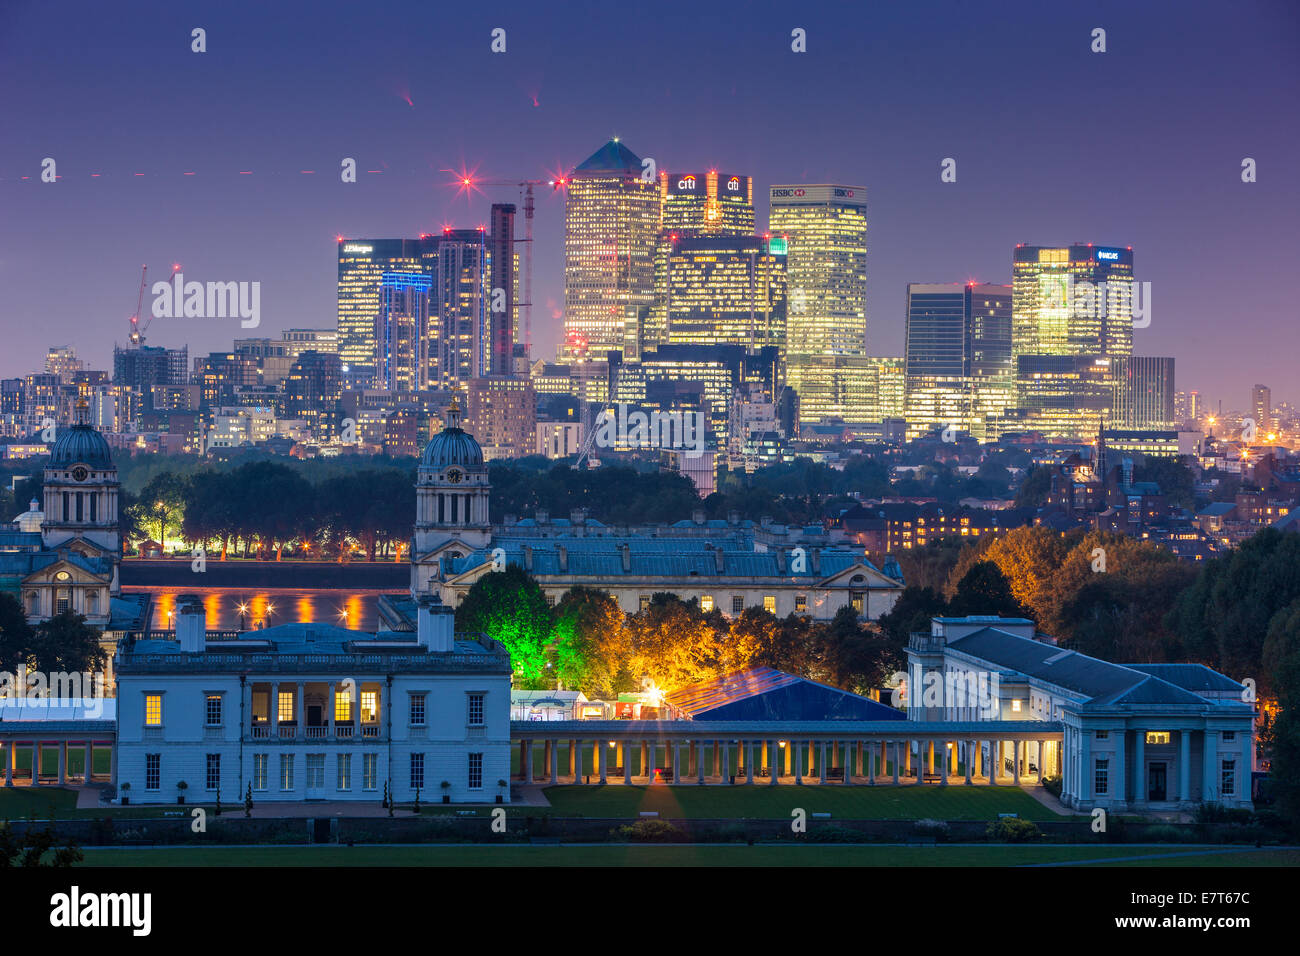 Canary Wharf and the London City  tower background with the old Royal Navy College in the foreground. evening landscape shot Stock Photo